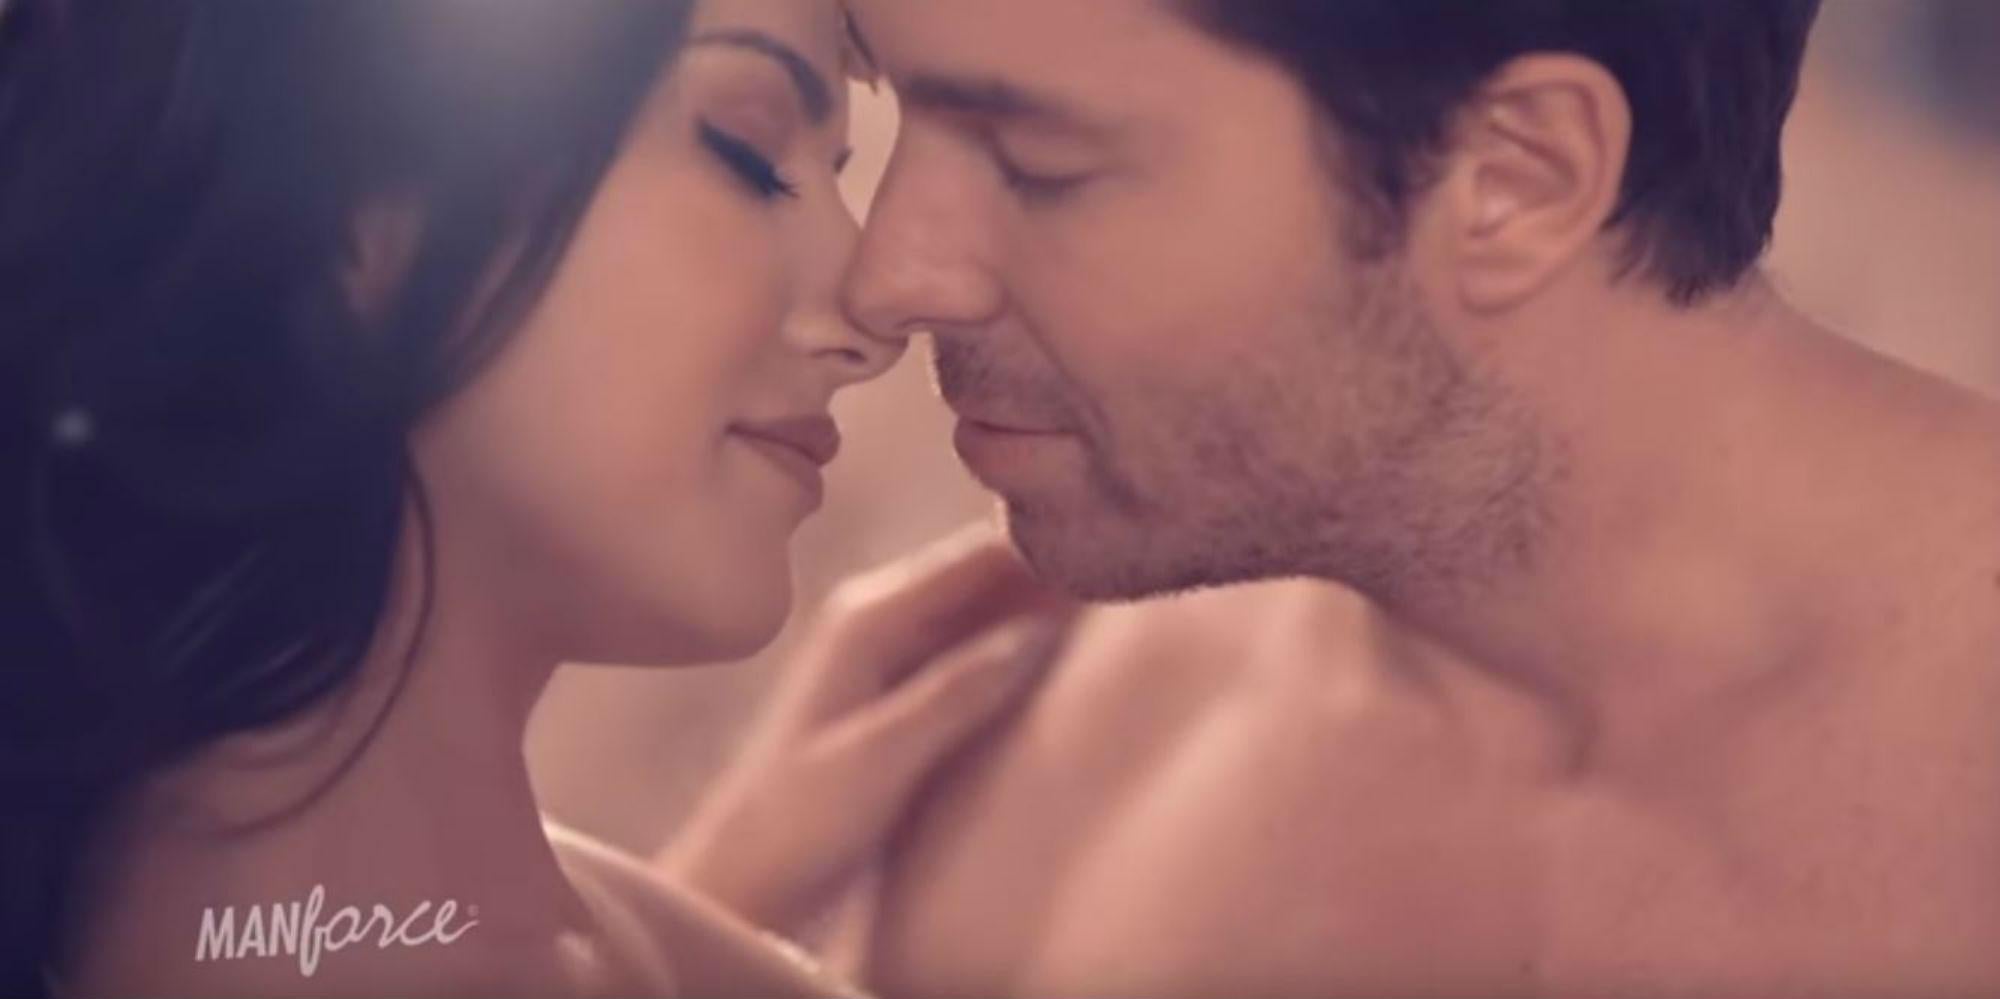 Sanny Leone Condom Fuck Video - A condom advert featuring an ex porn star is causing fury in India |  indy100 | indy100